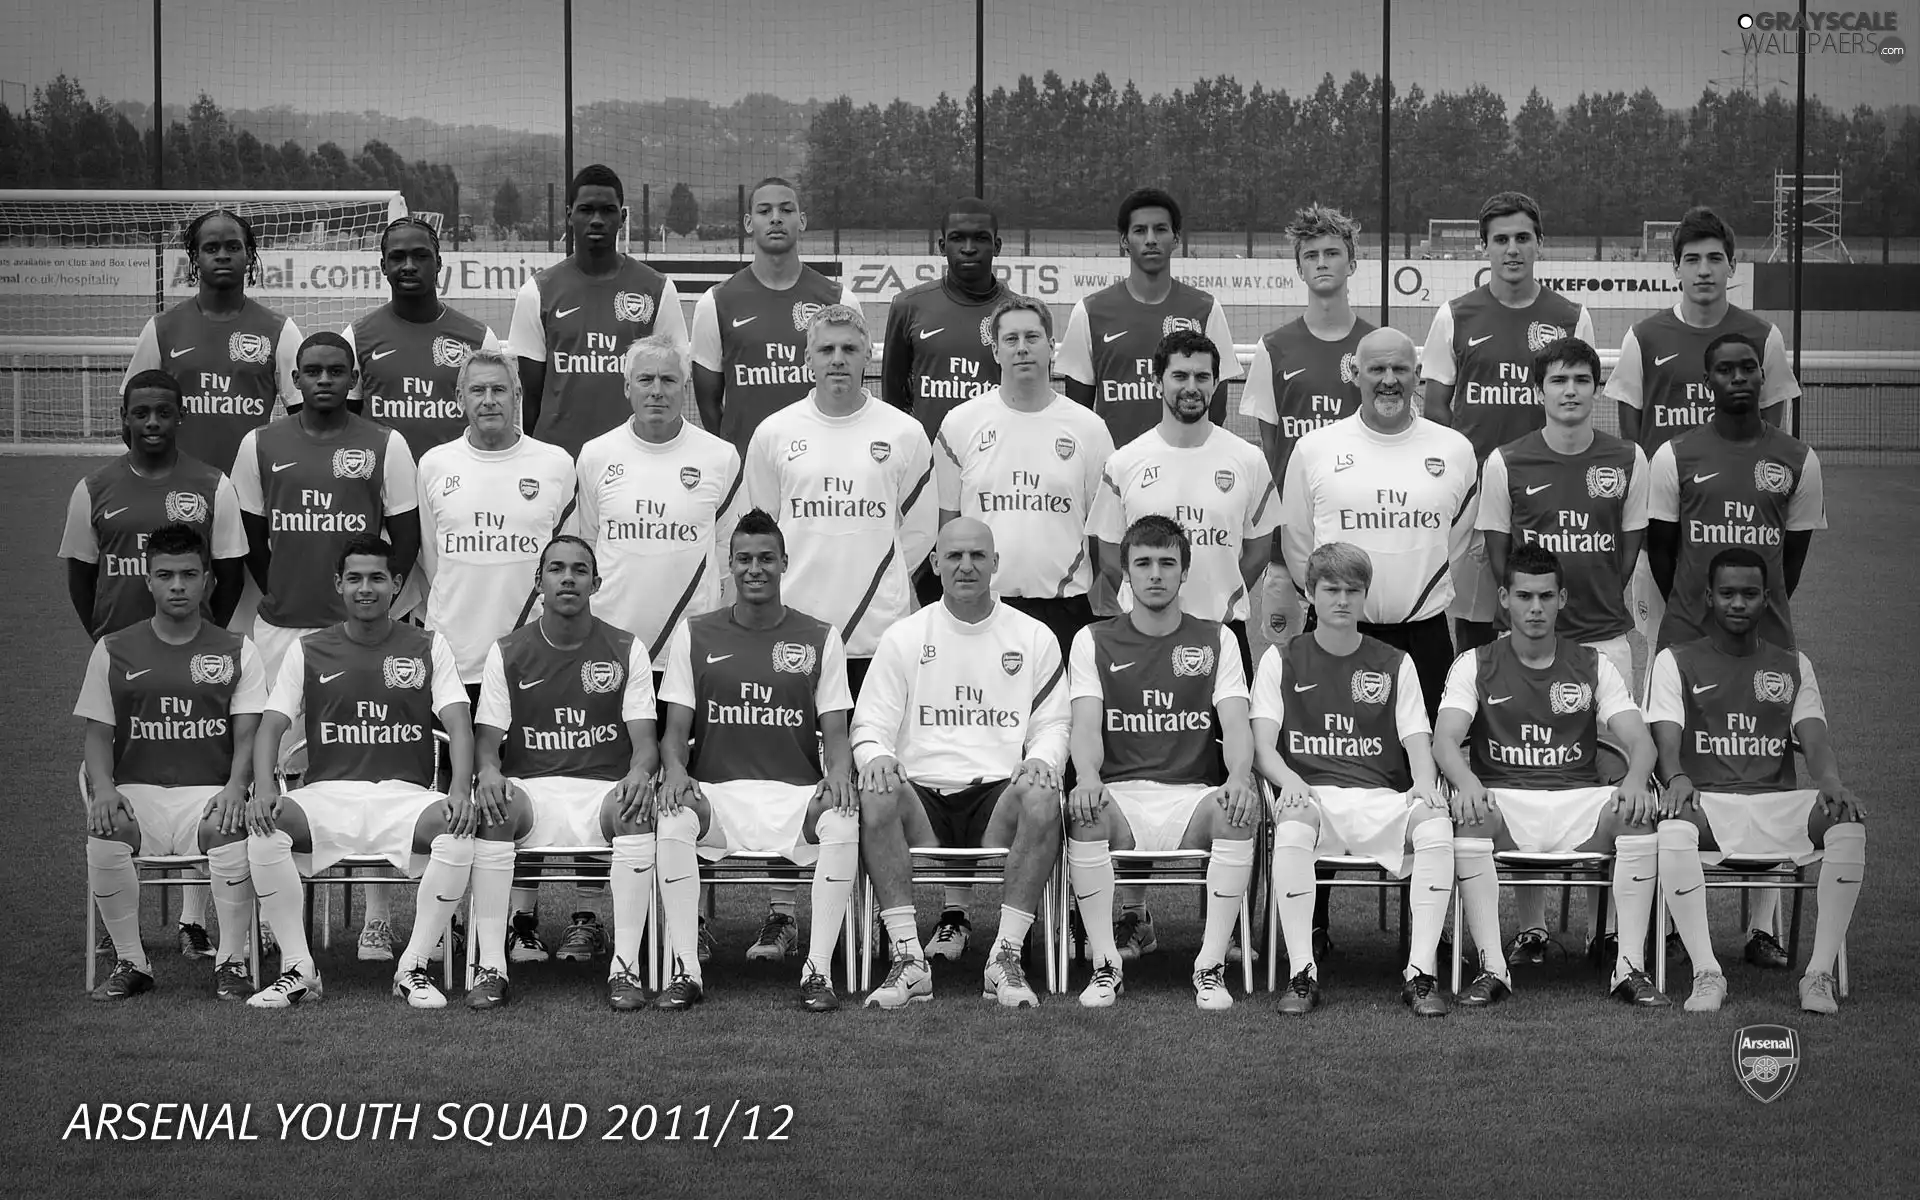 team, Youth, Composition 2011-2012, Arsenal